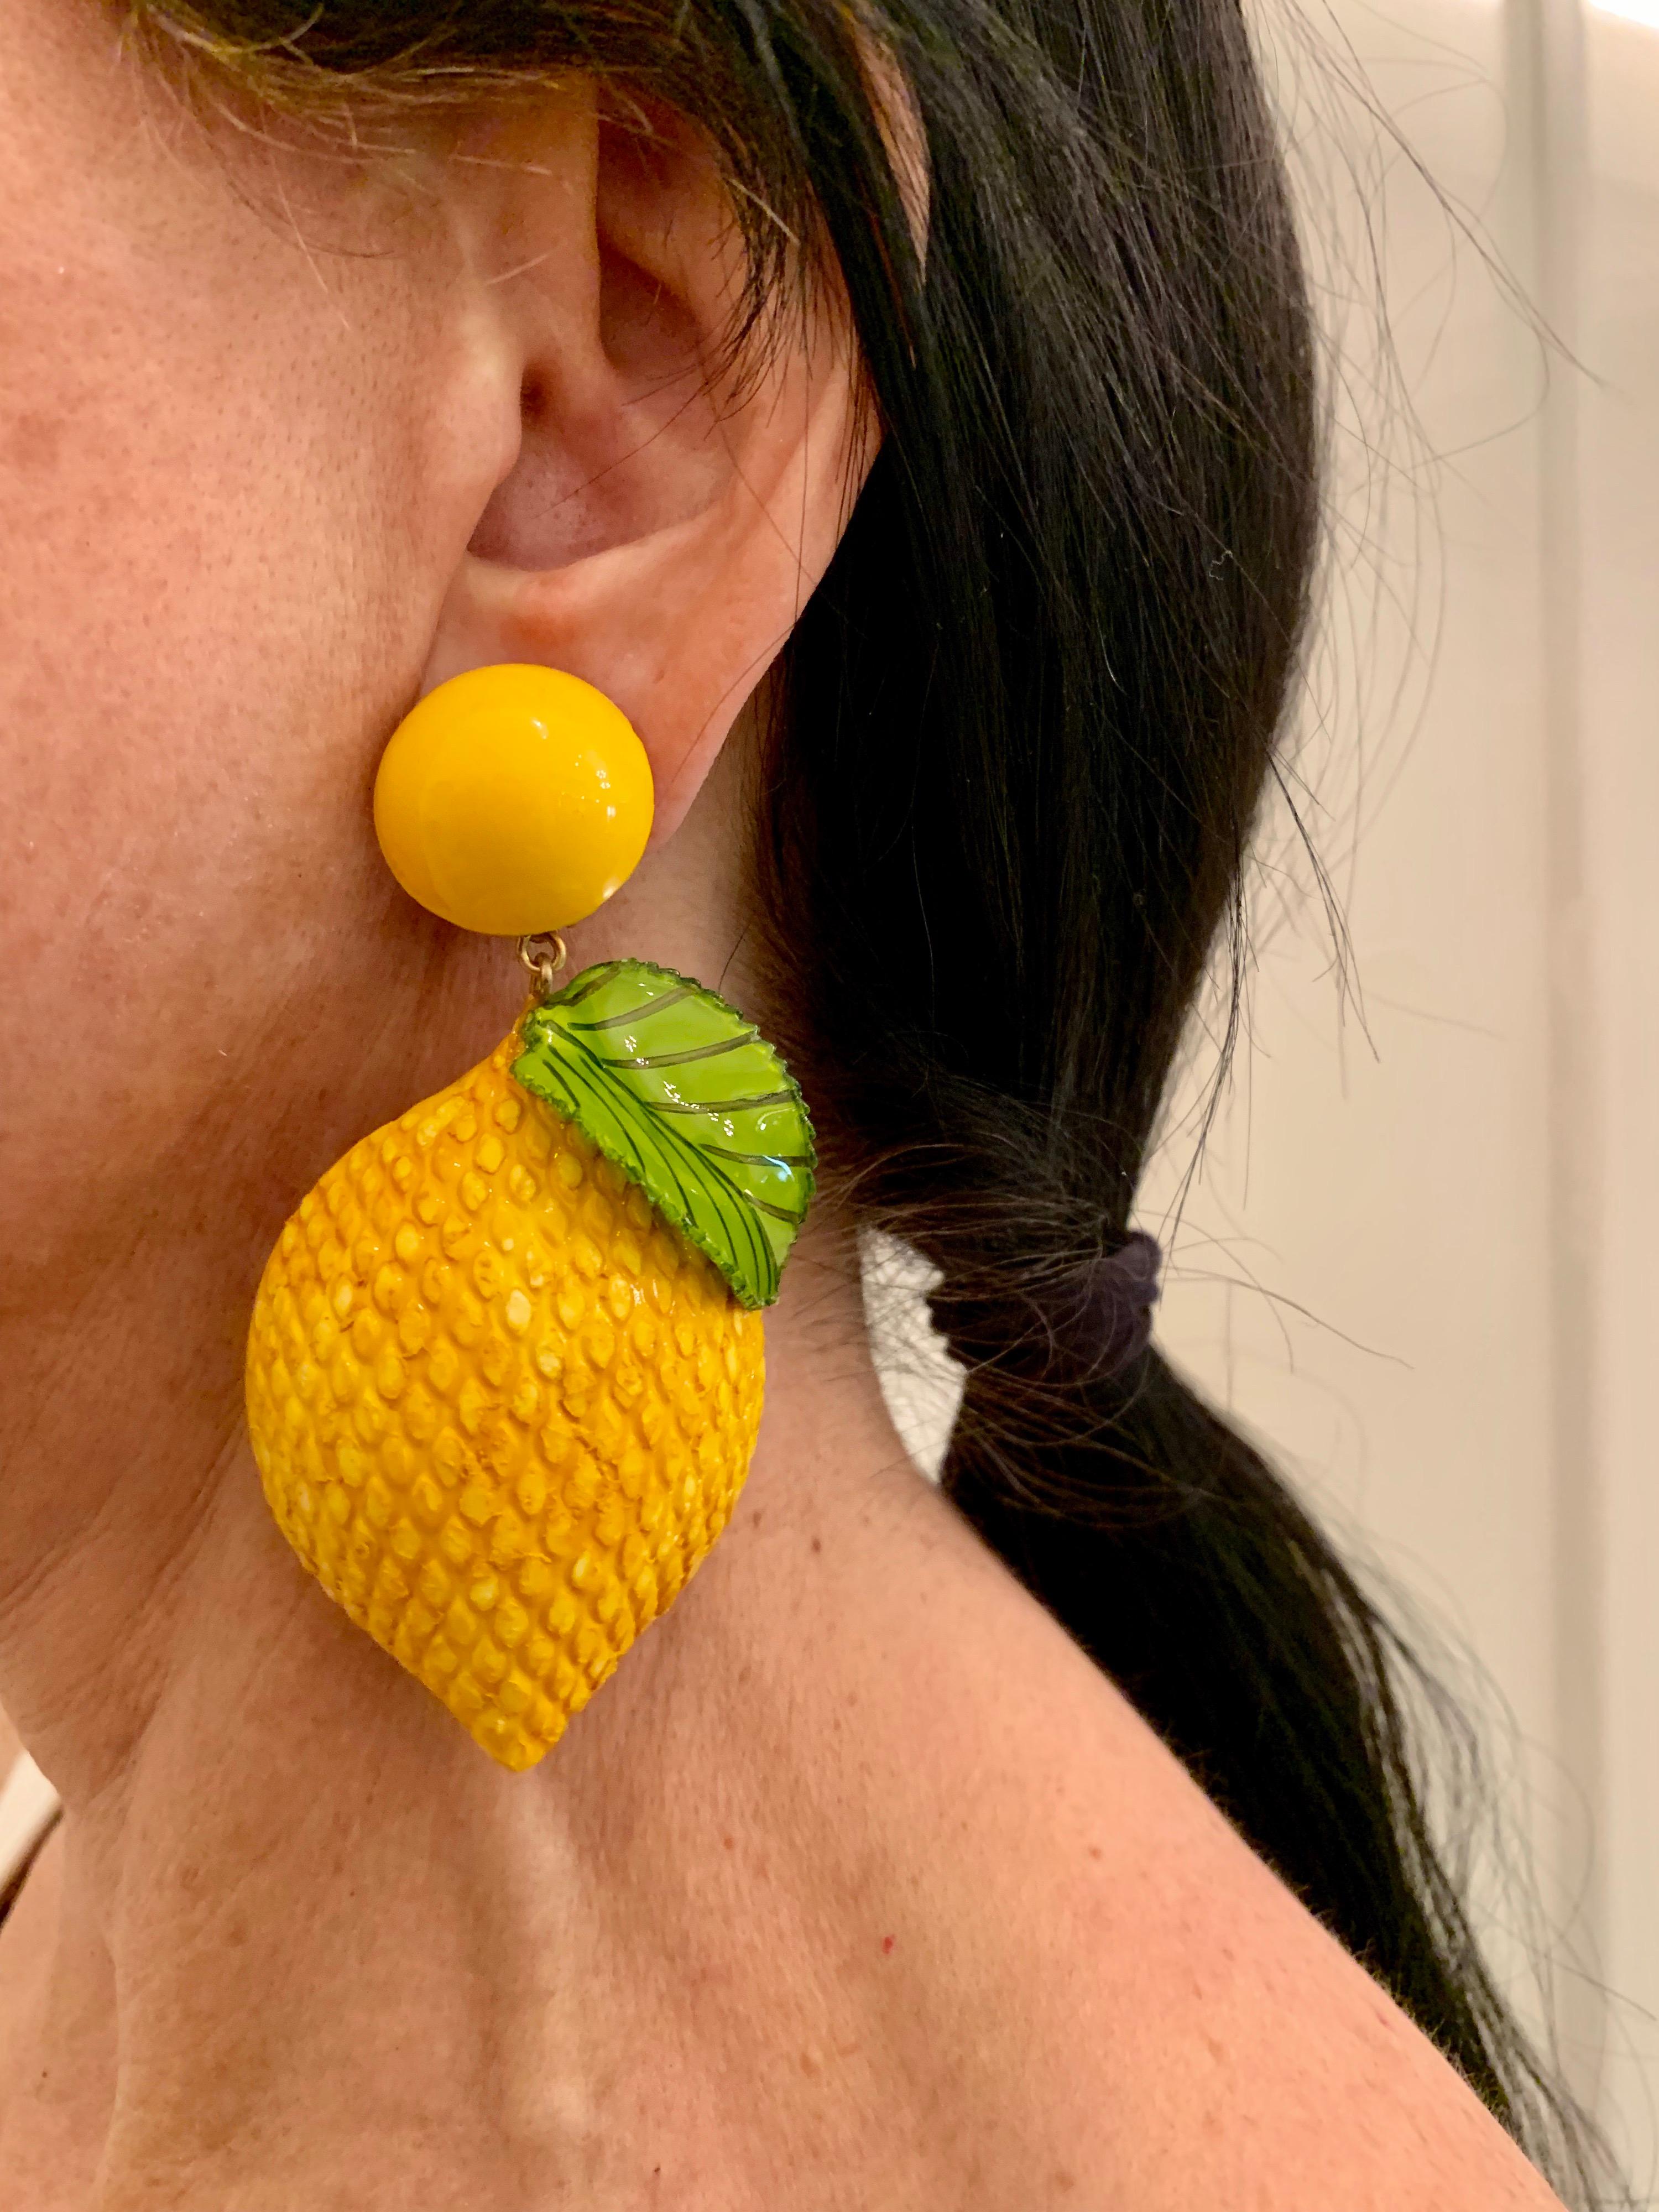 Light and easy to wear, these contemporary handmade artisanal clip-on statement earrings were made in Paris by Cilea. The lightweight earrings feature giant lemons, comprised out of enamel and resin. The lemons have a three-dimensional oversized